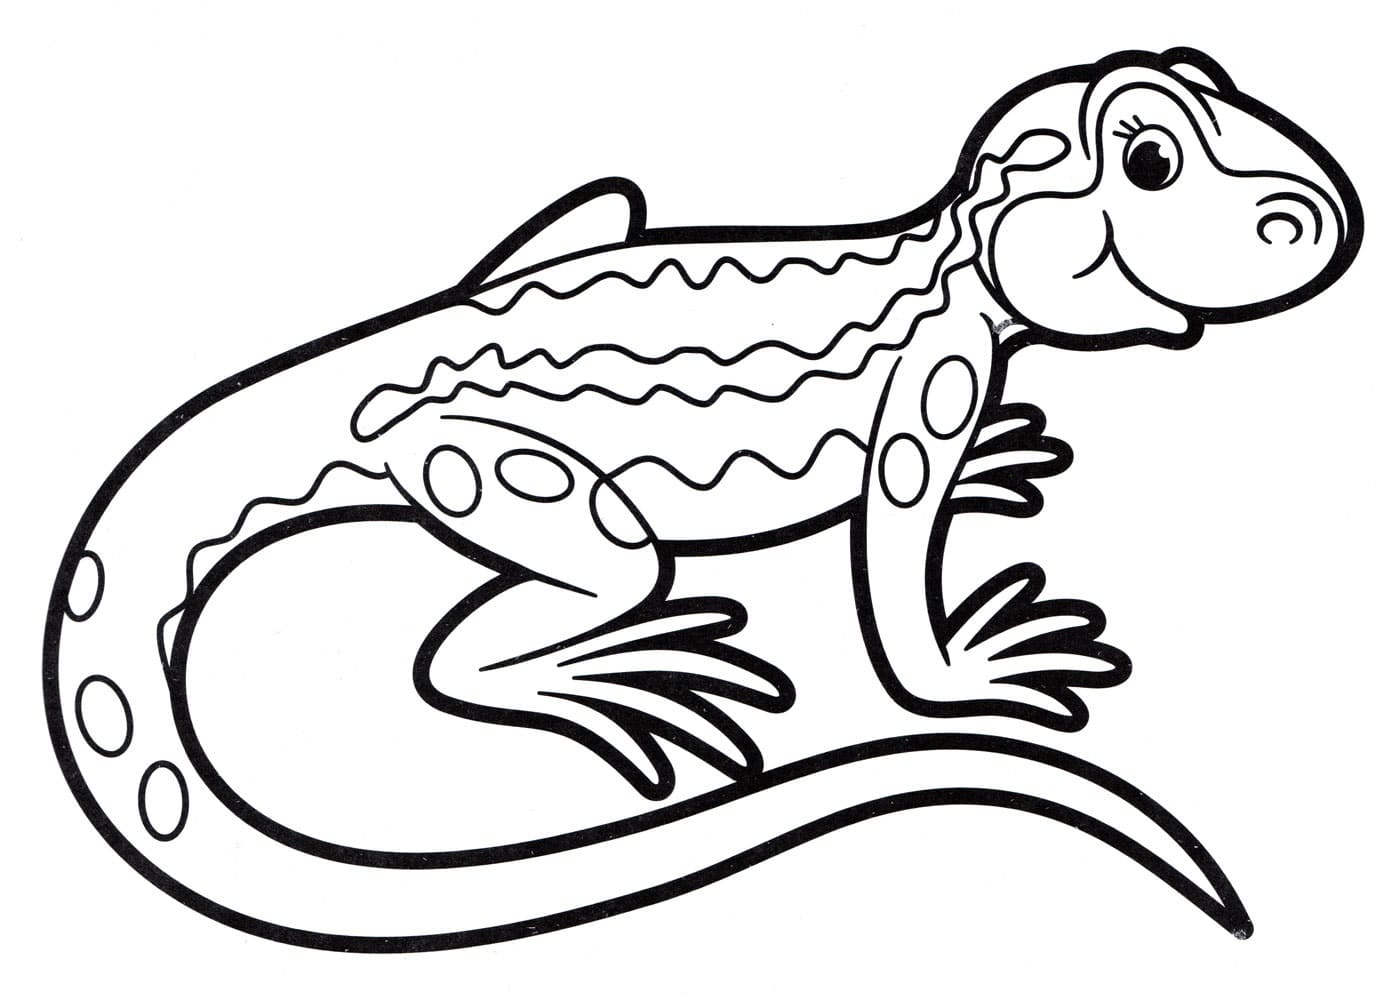 monitor-lizard-coloring-page